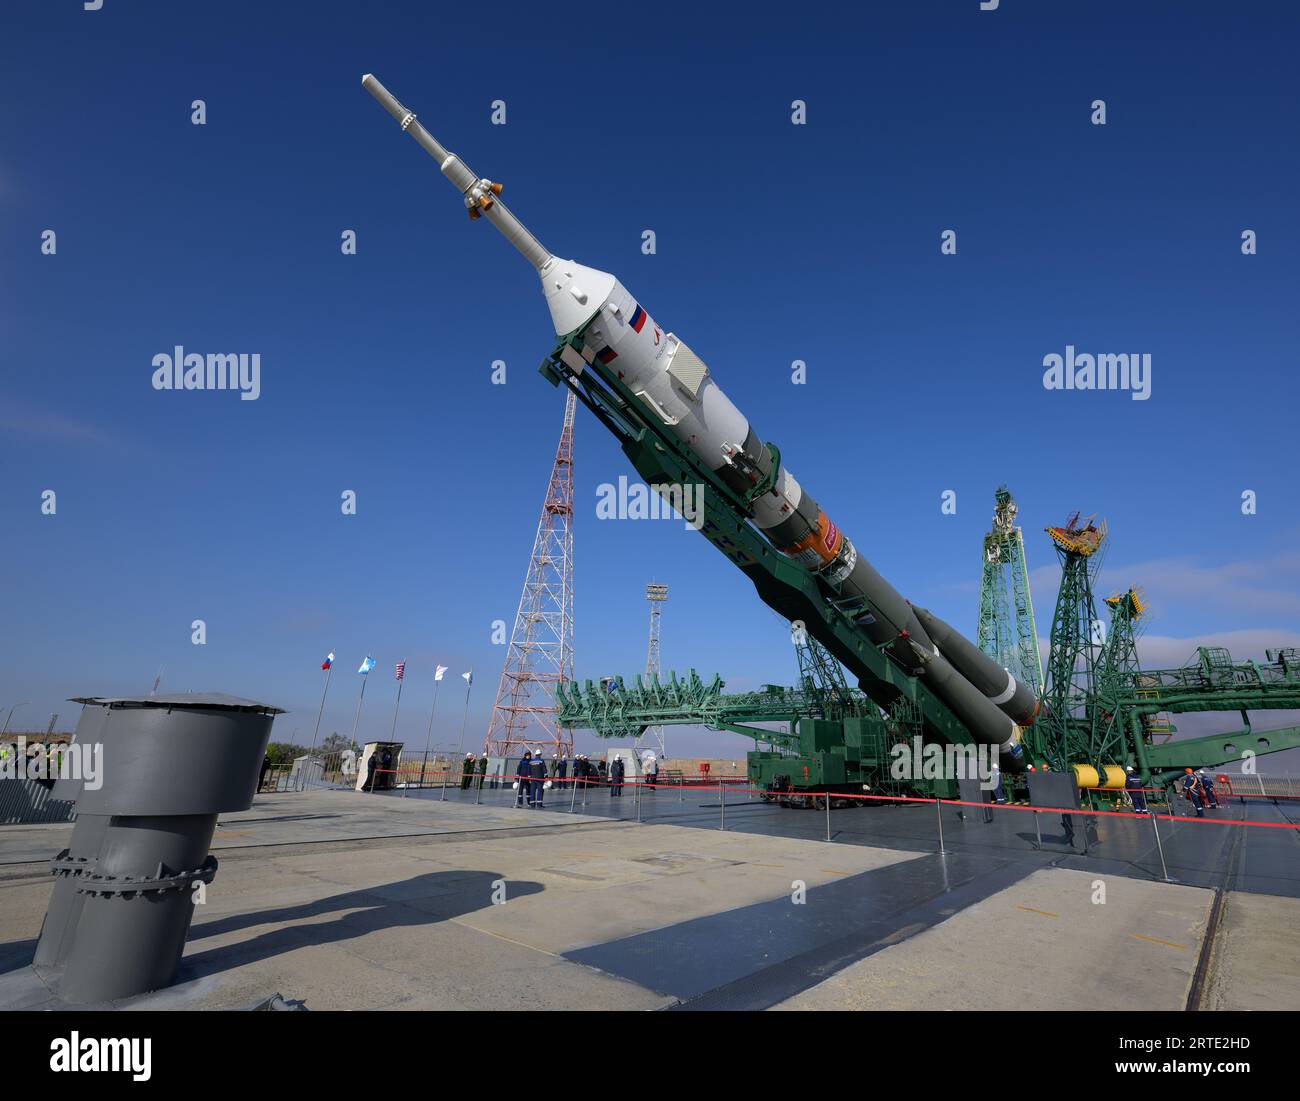 Baikonur, Kazakhstan. 12th Sep, 2023. The Russian Soyuz MS-24 spacecraft and booster rocket are lifted into vertical position after roll-out at launch pad 31 of the Baikonur Cosmodrome, September 12, 2023 in Baikonur, Kazakhstan. International Space Station Expedition 70 crew members astronaut Loral O'Hara of NASA, and cosmonauts Oleg Kononenko, and Nikolai Chub of Roscosmos are set to launch September 15th to the orbiting laboratory. Credit: Bill Ingalls/NASA/Alamy Live News Stock Photo